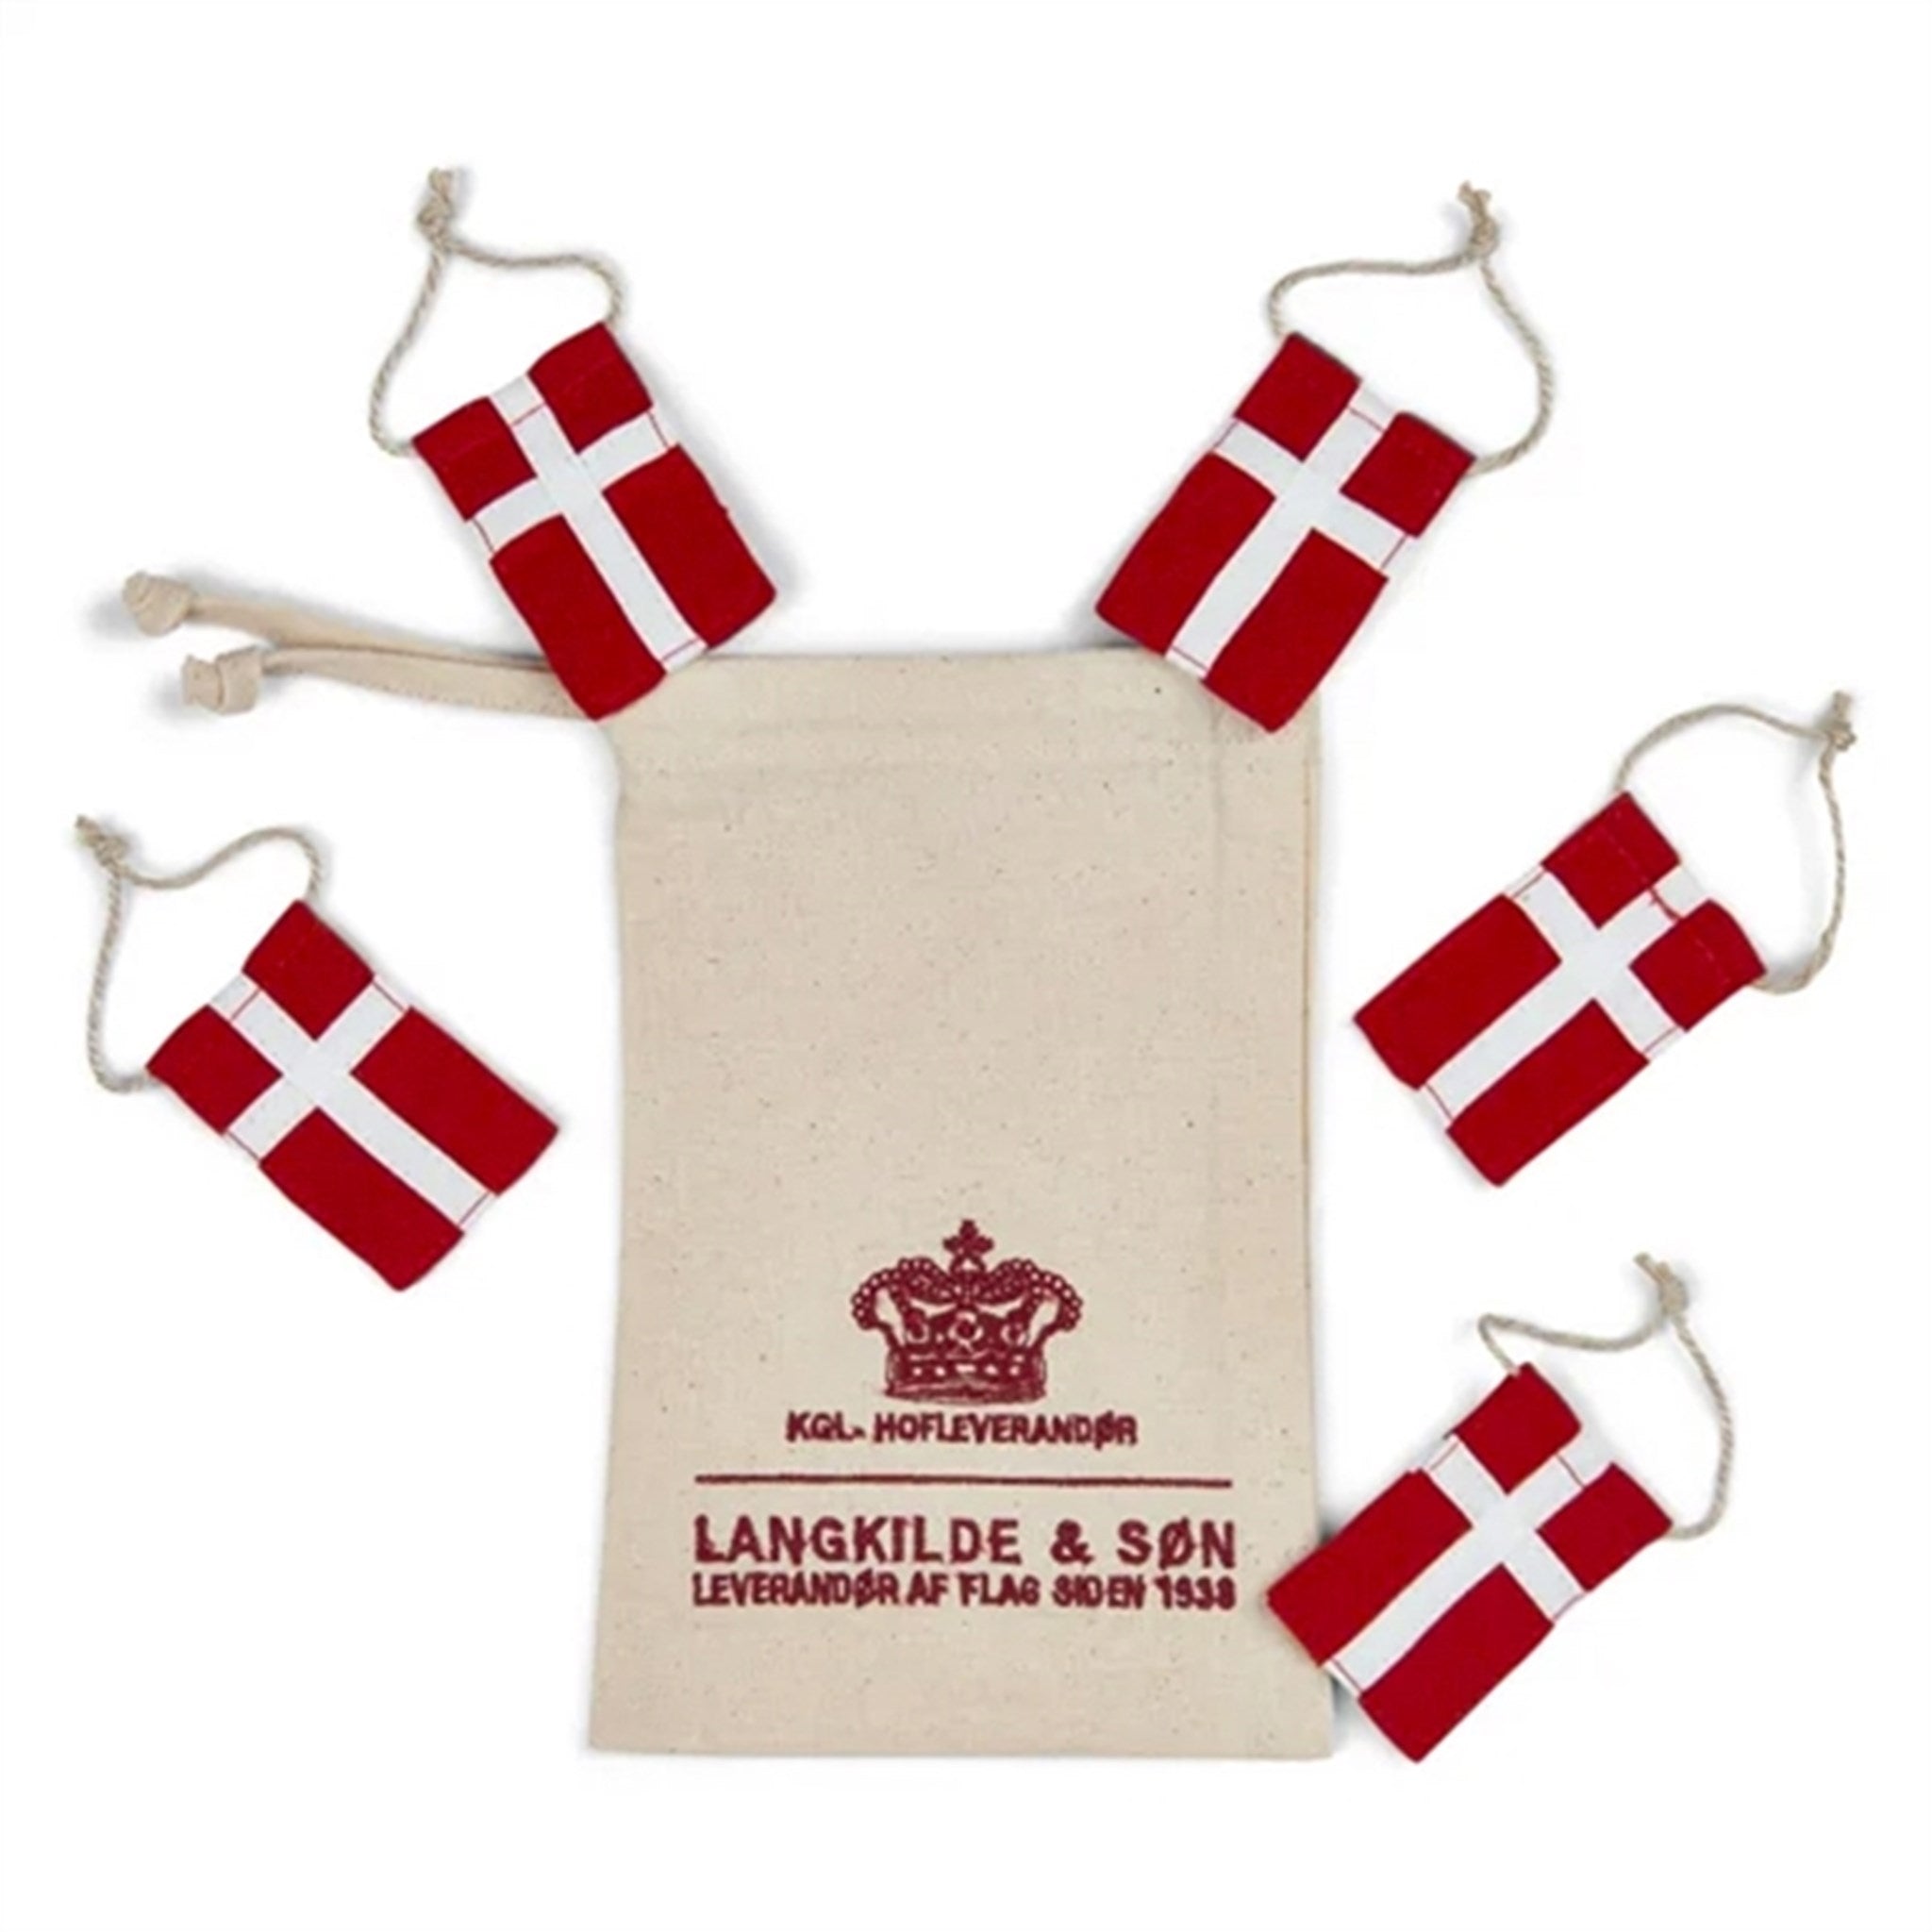 Langkilde & Søn Flags 5 pieces